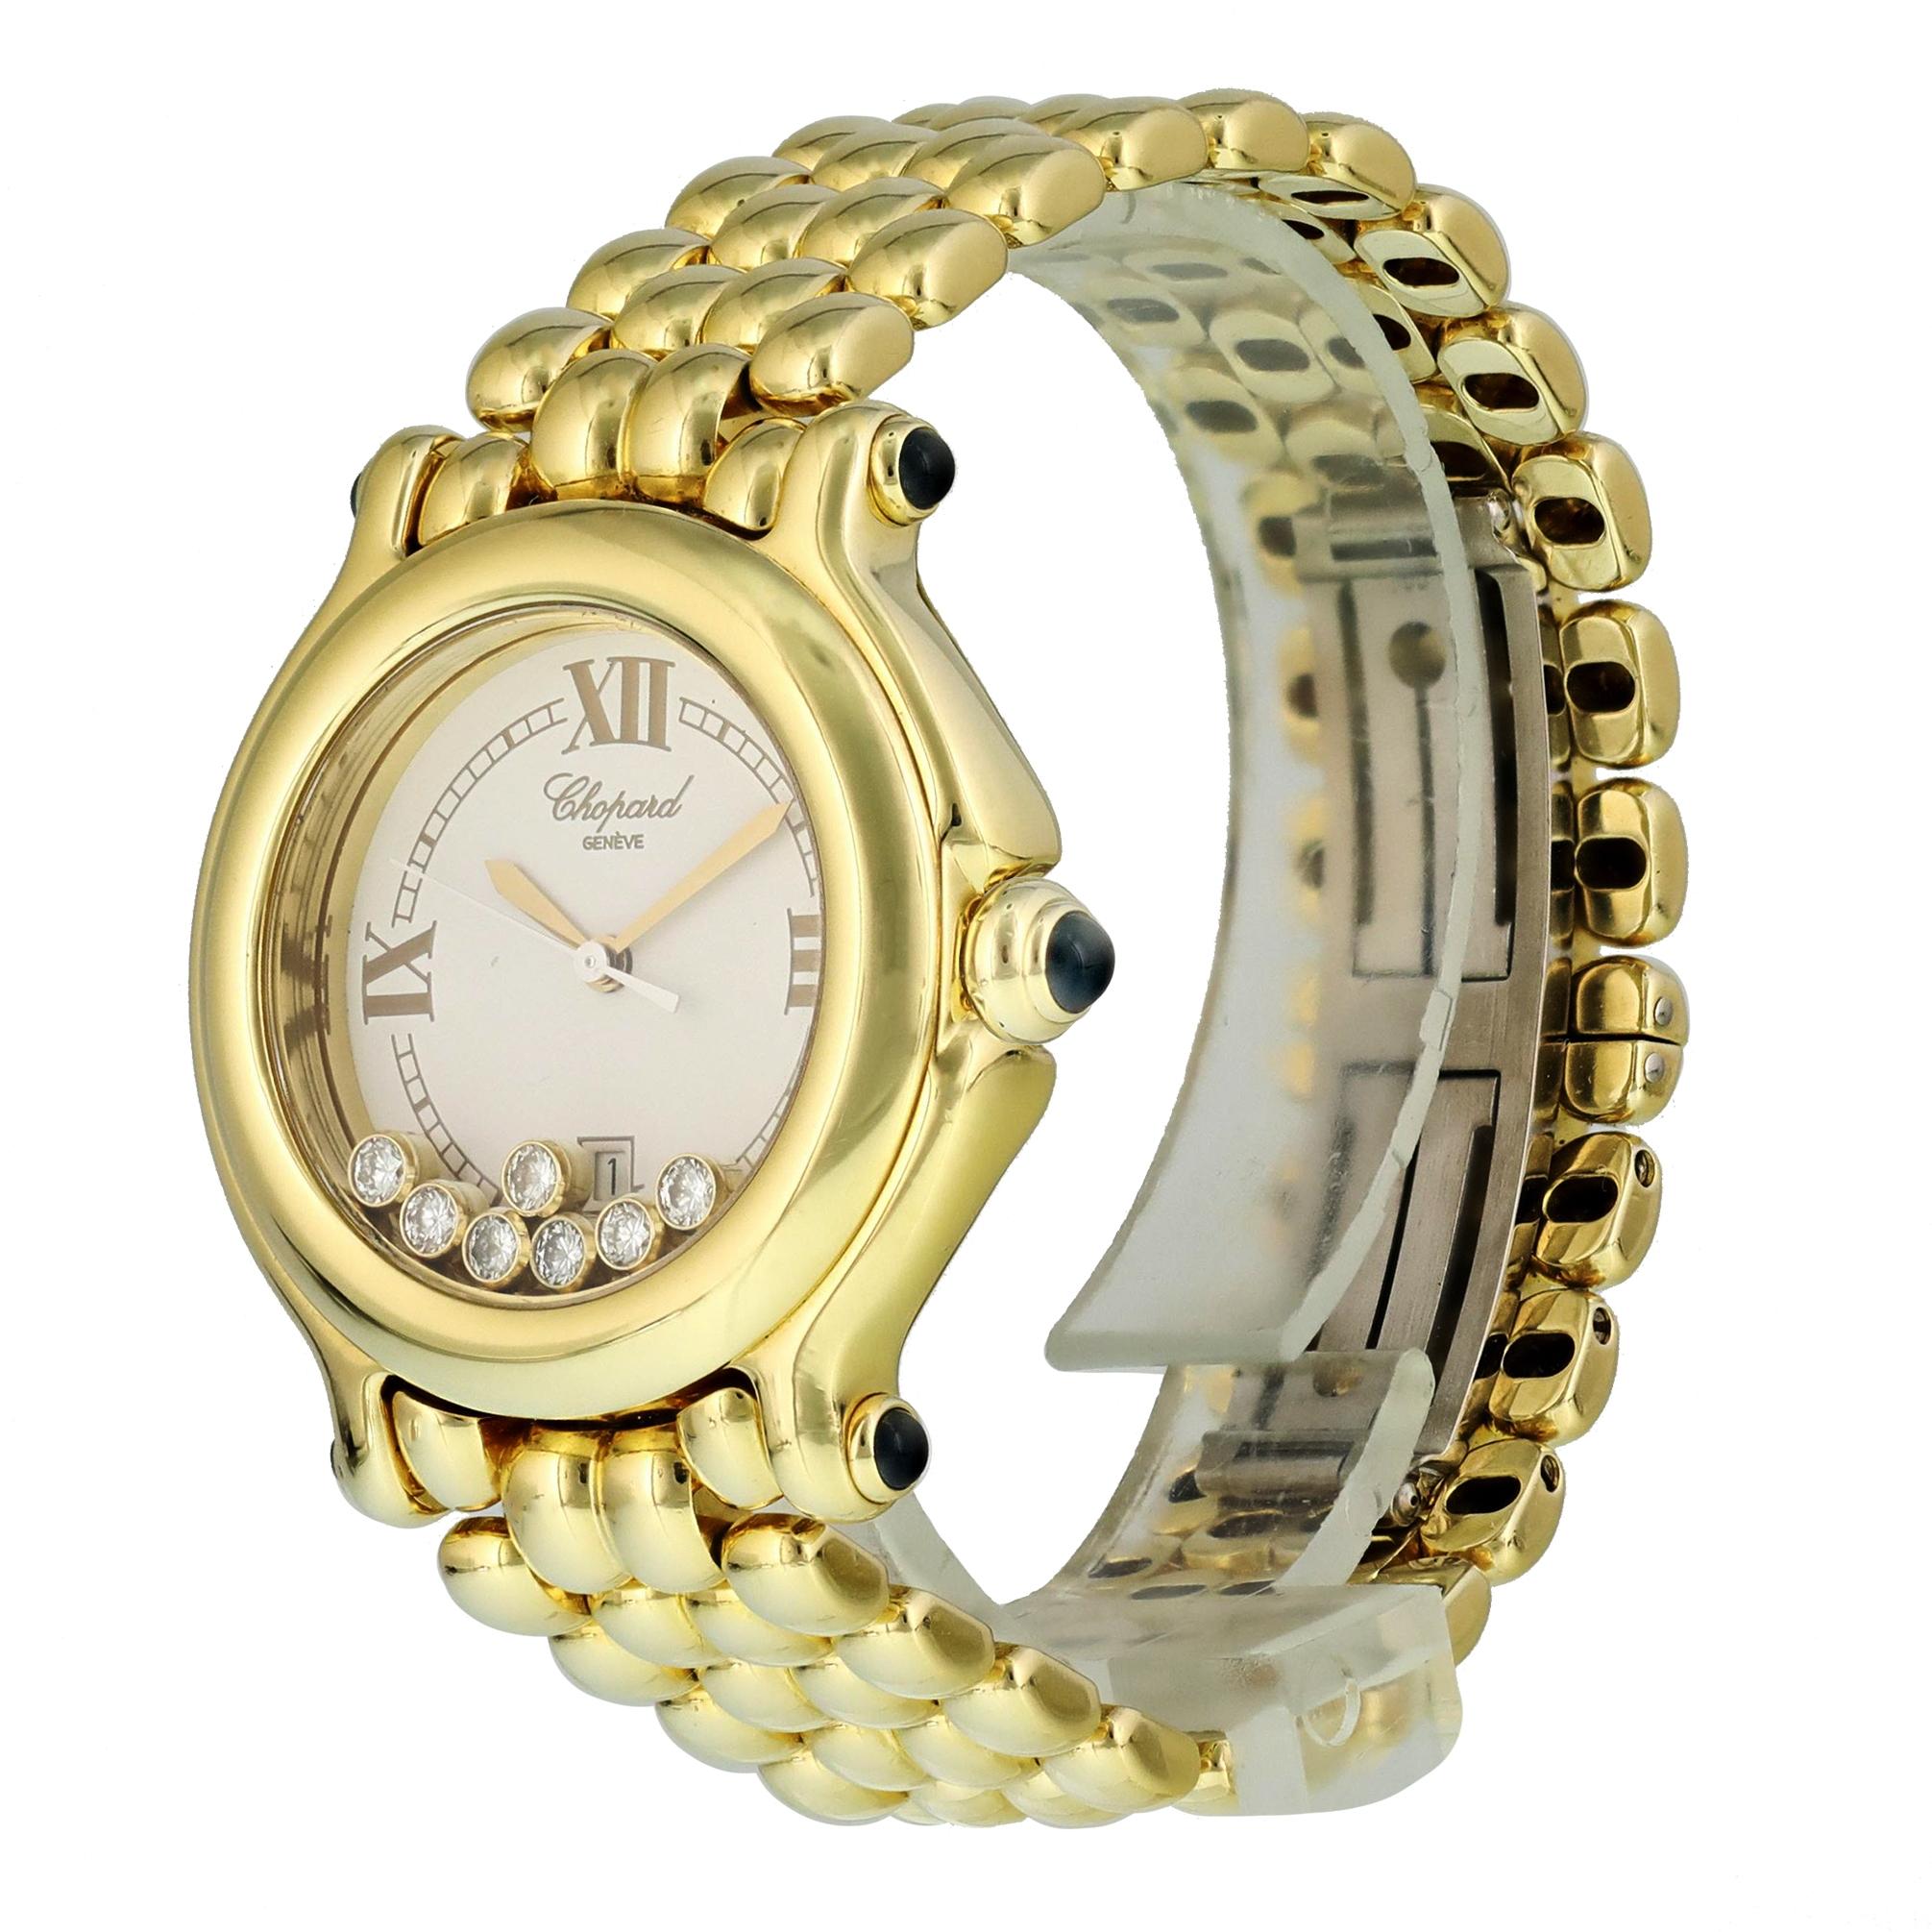 Chopard Happy Sport 4144 Floating Diamonds Ladies Watch
32mm 18k Yellow Gold case. 
Yellow Gold smooth bezel. 
White dial with gold hands and Roman numeral hour markers. 
Minute markers on the outer dial. 
Date display at the 6 o'clock position. 
7